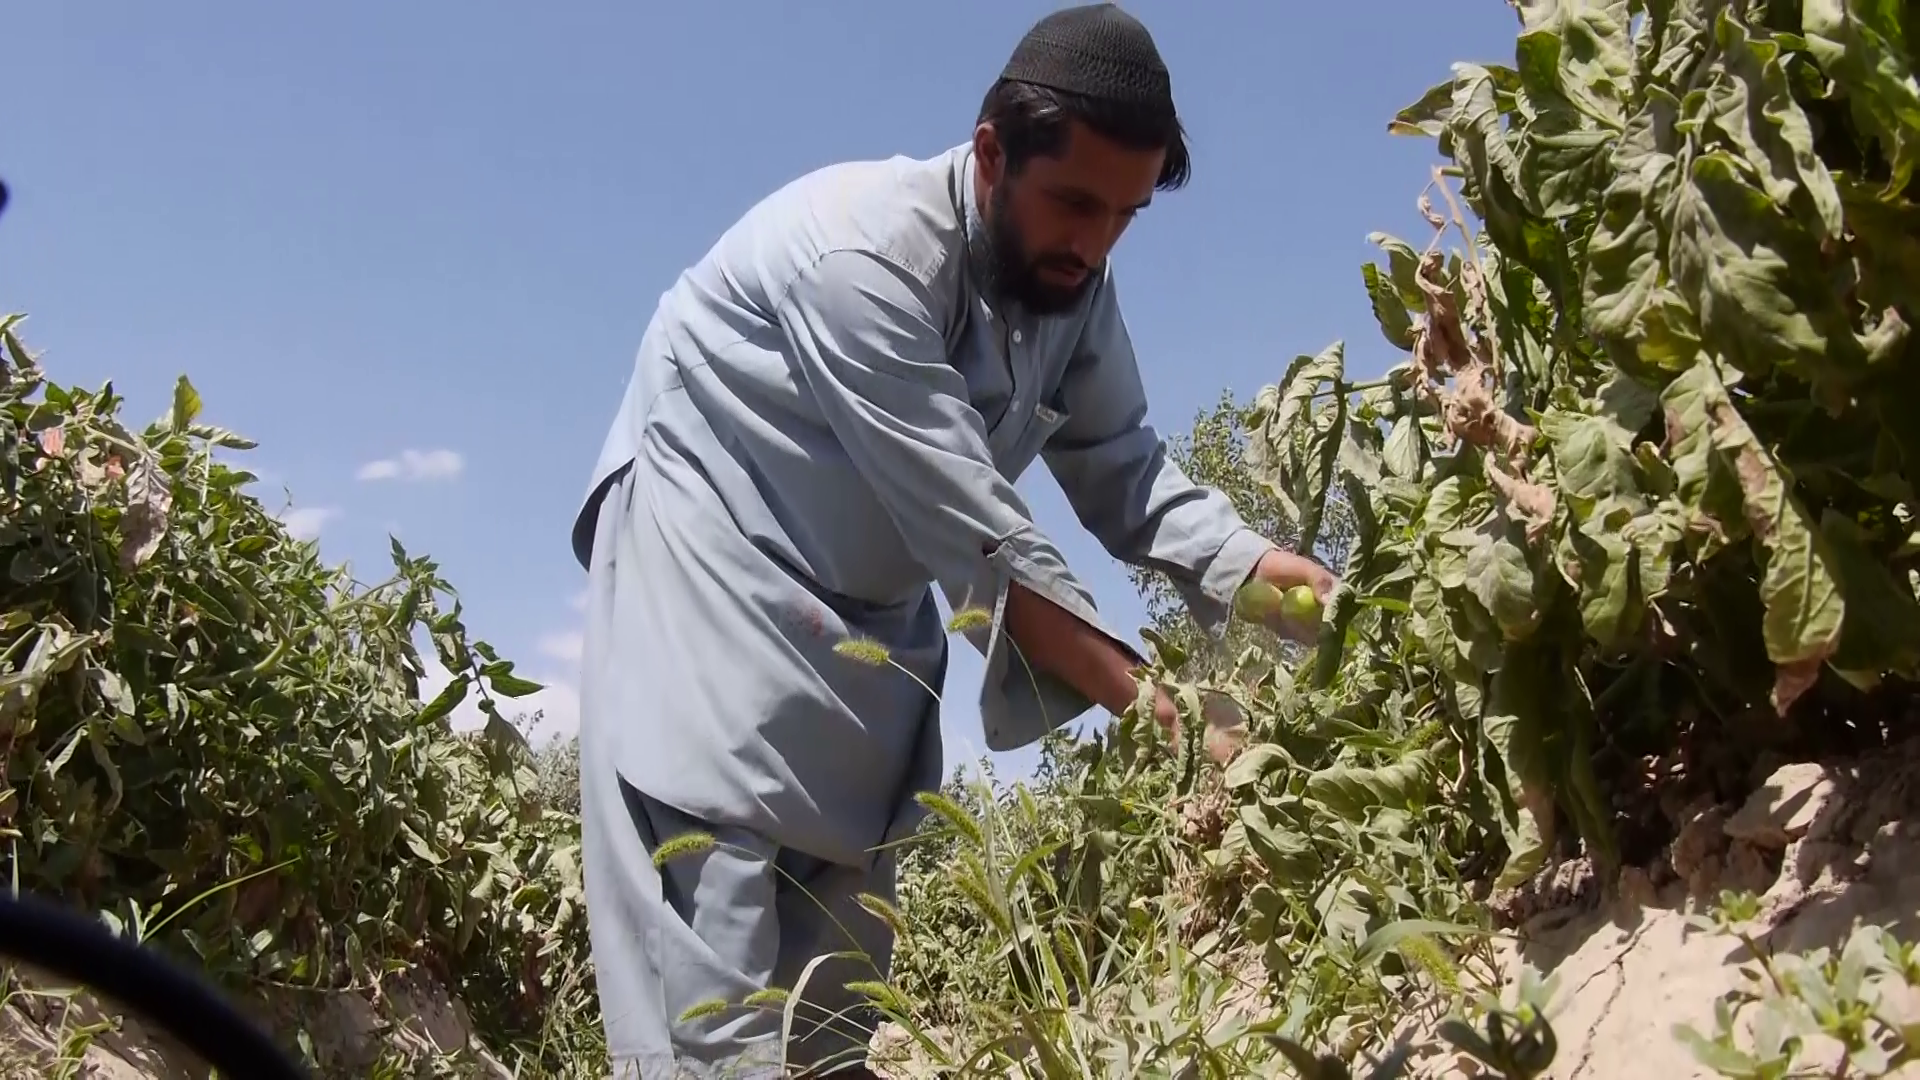 Another resident Sayed Ahmad who is a local farmer in the same village in the Taliban territory said the war must end as soon as possible.